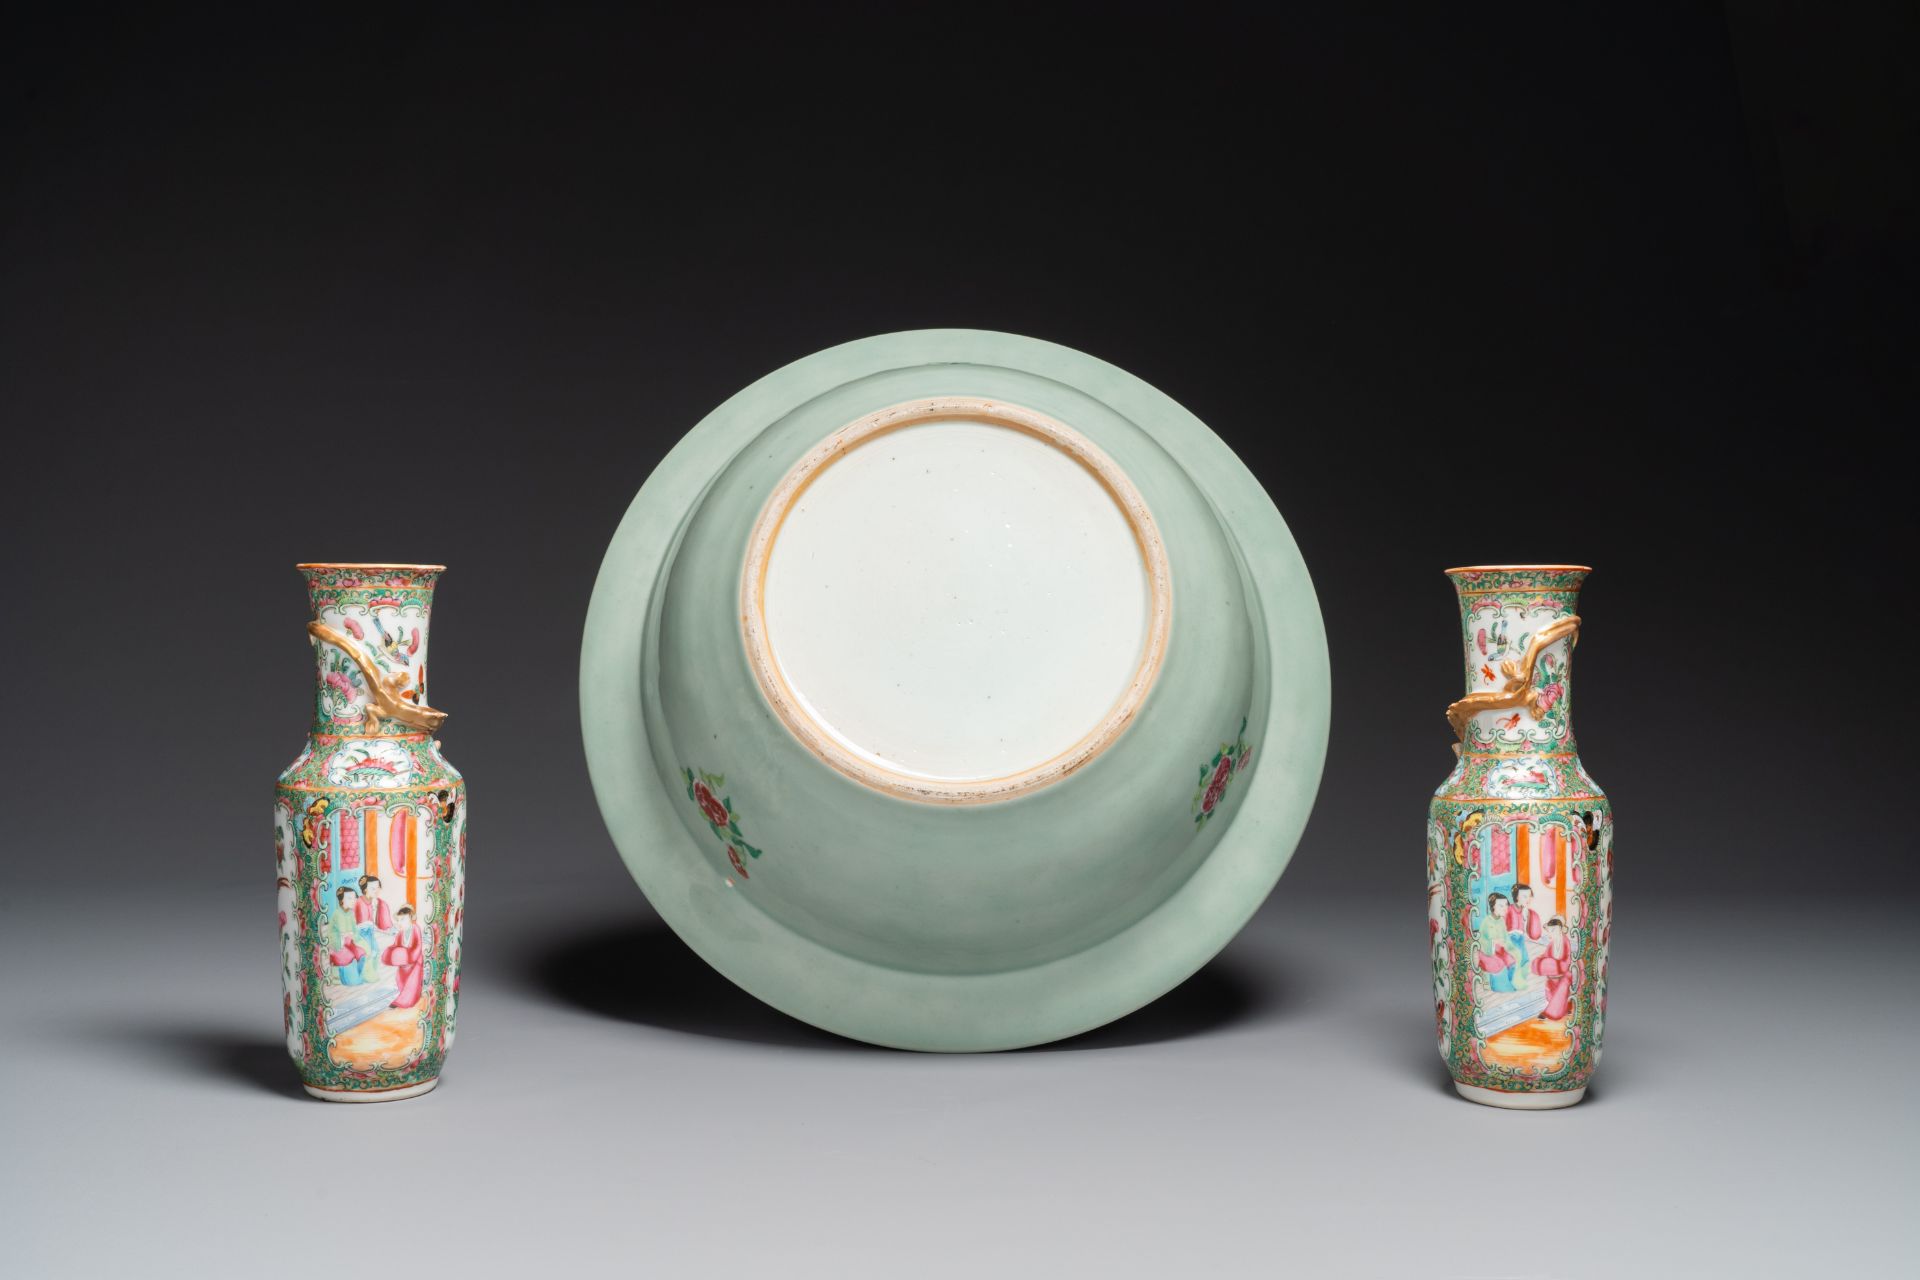 A Chinese Canton famille rose basin and a pair of vases vases with narrative design, 19th C. - Image 2 of 4